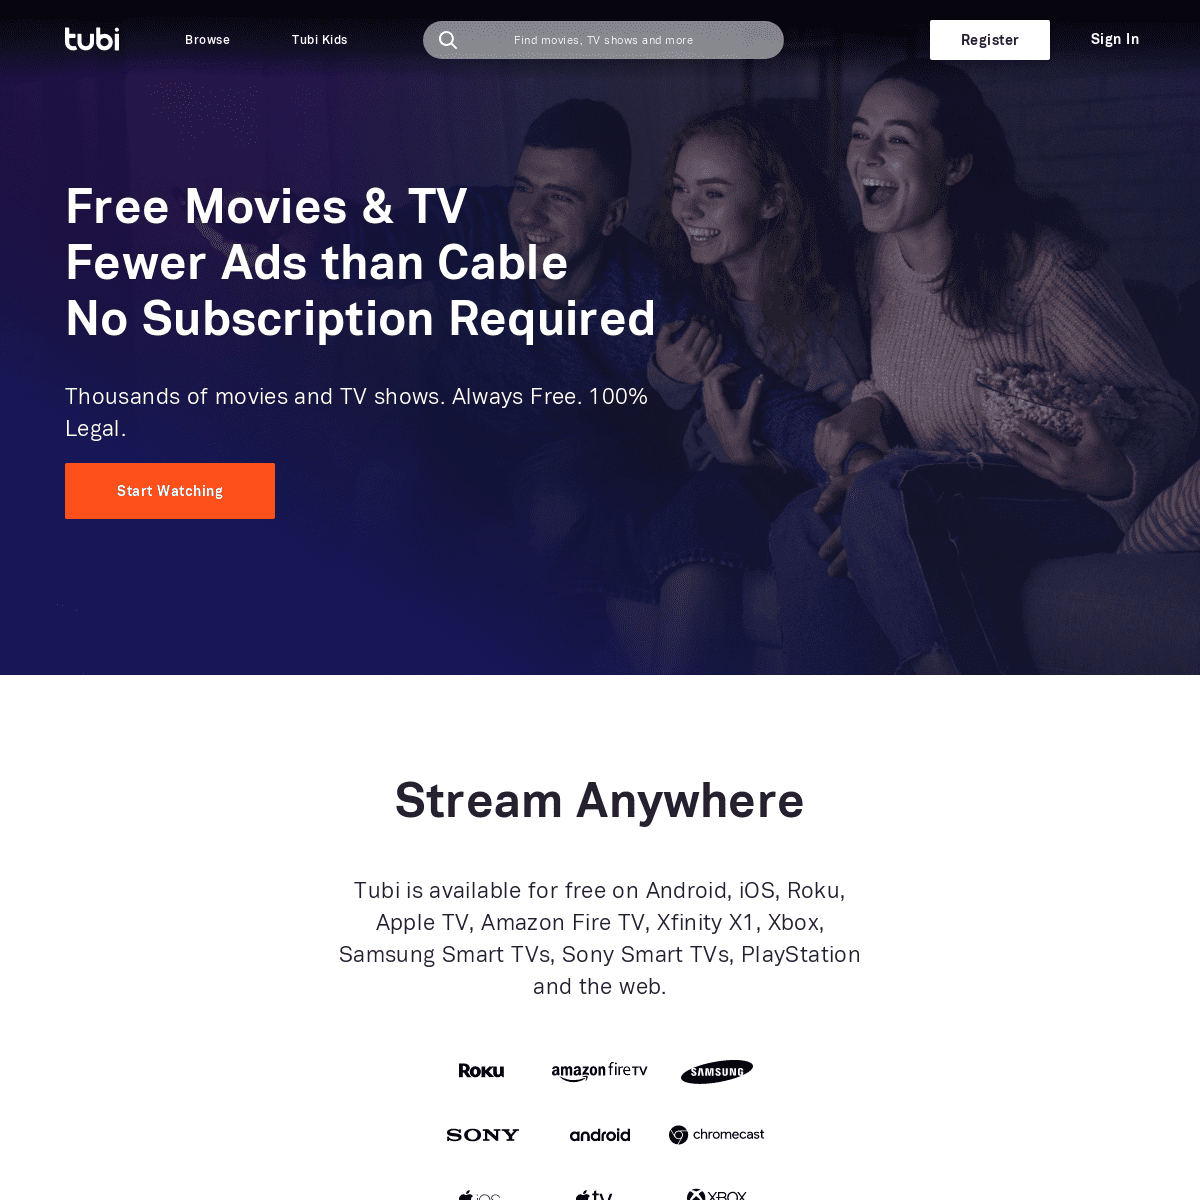 A complete backup of https://tubitv.com